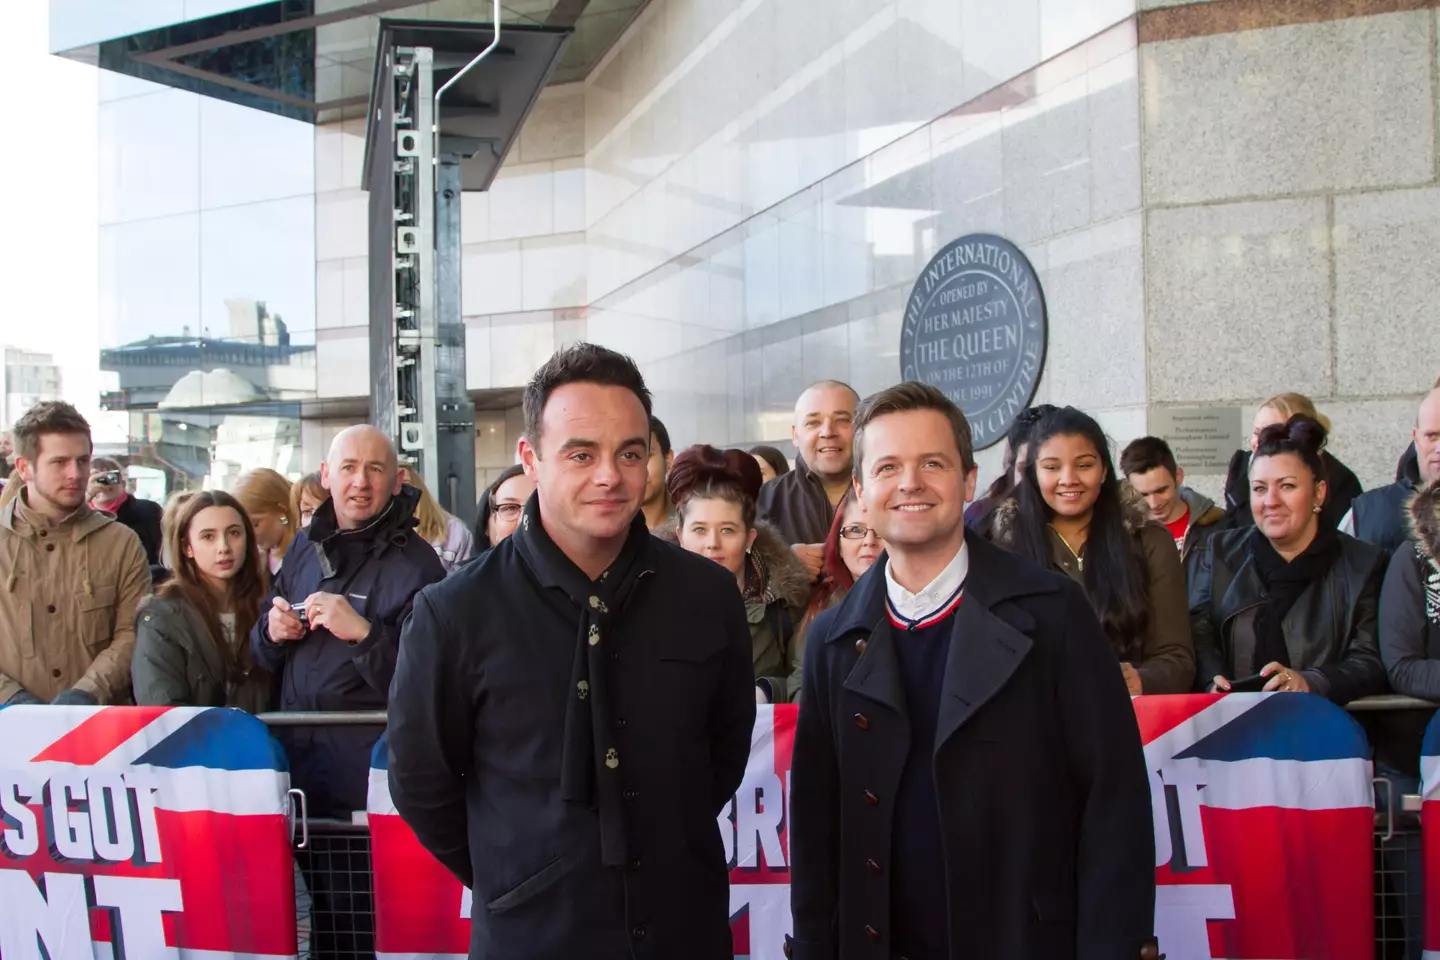 Ant and Dec's illness also means they're not presenting 'Britain's Got Talent: The Ultimate Magician'.